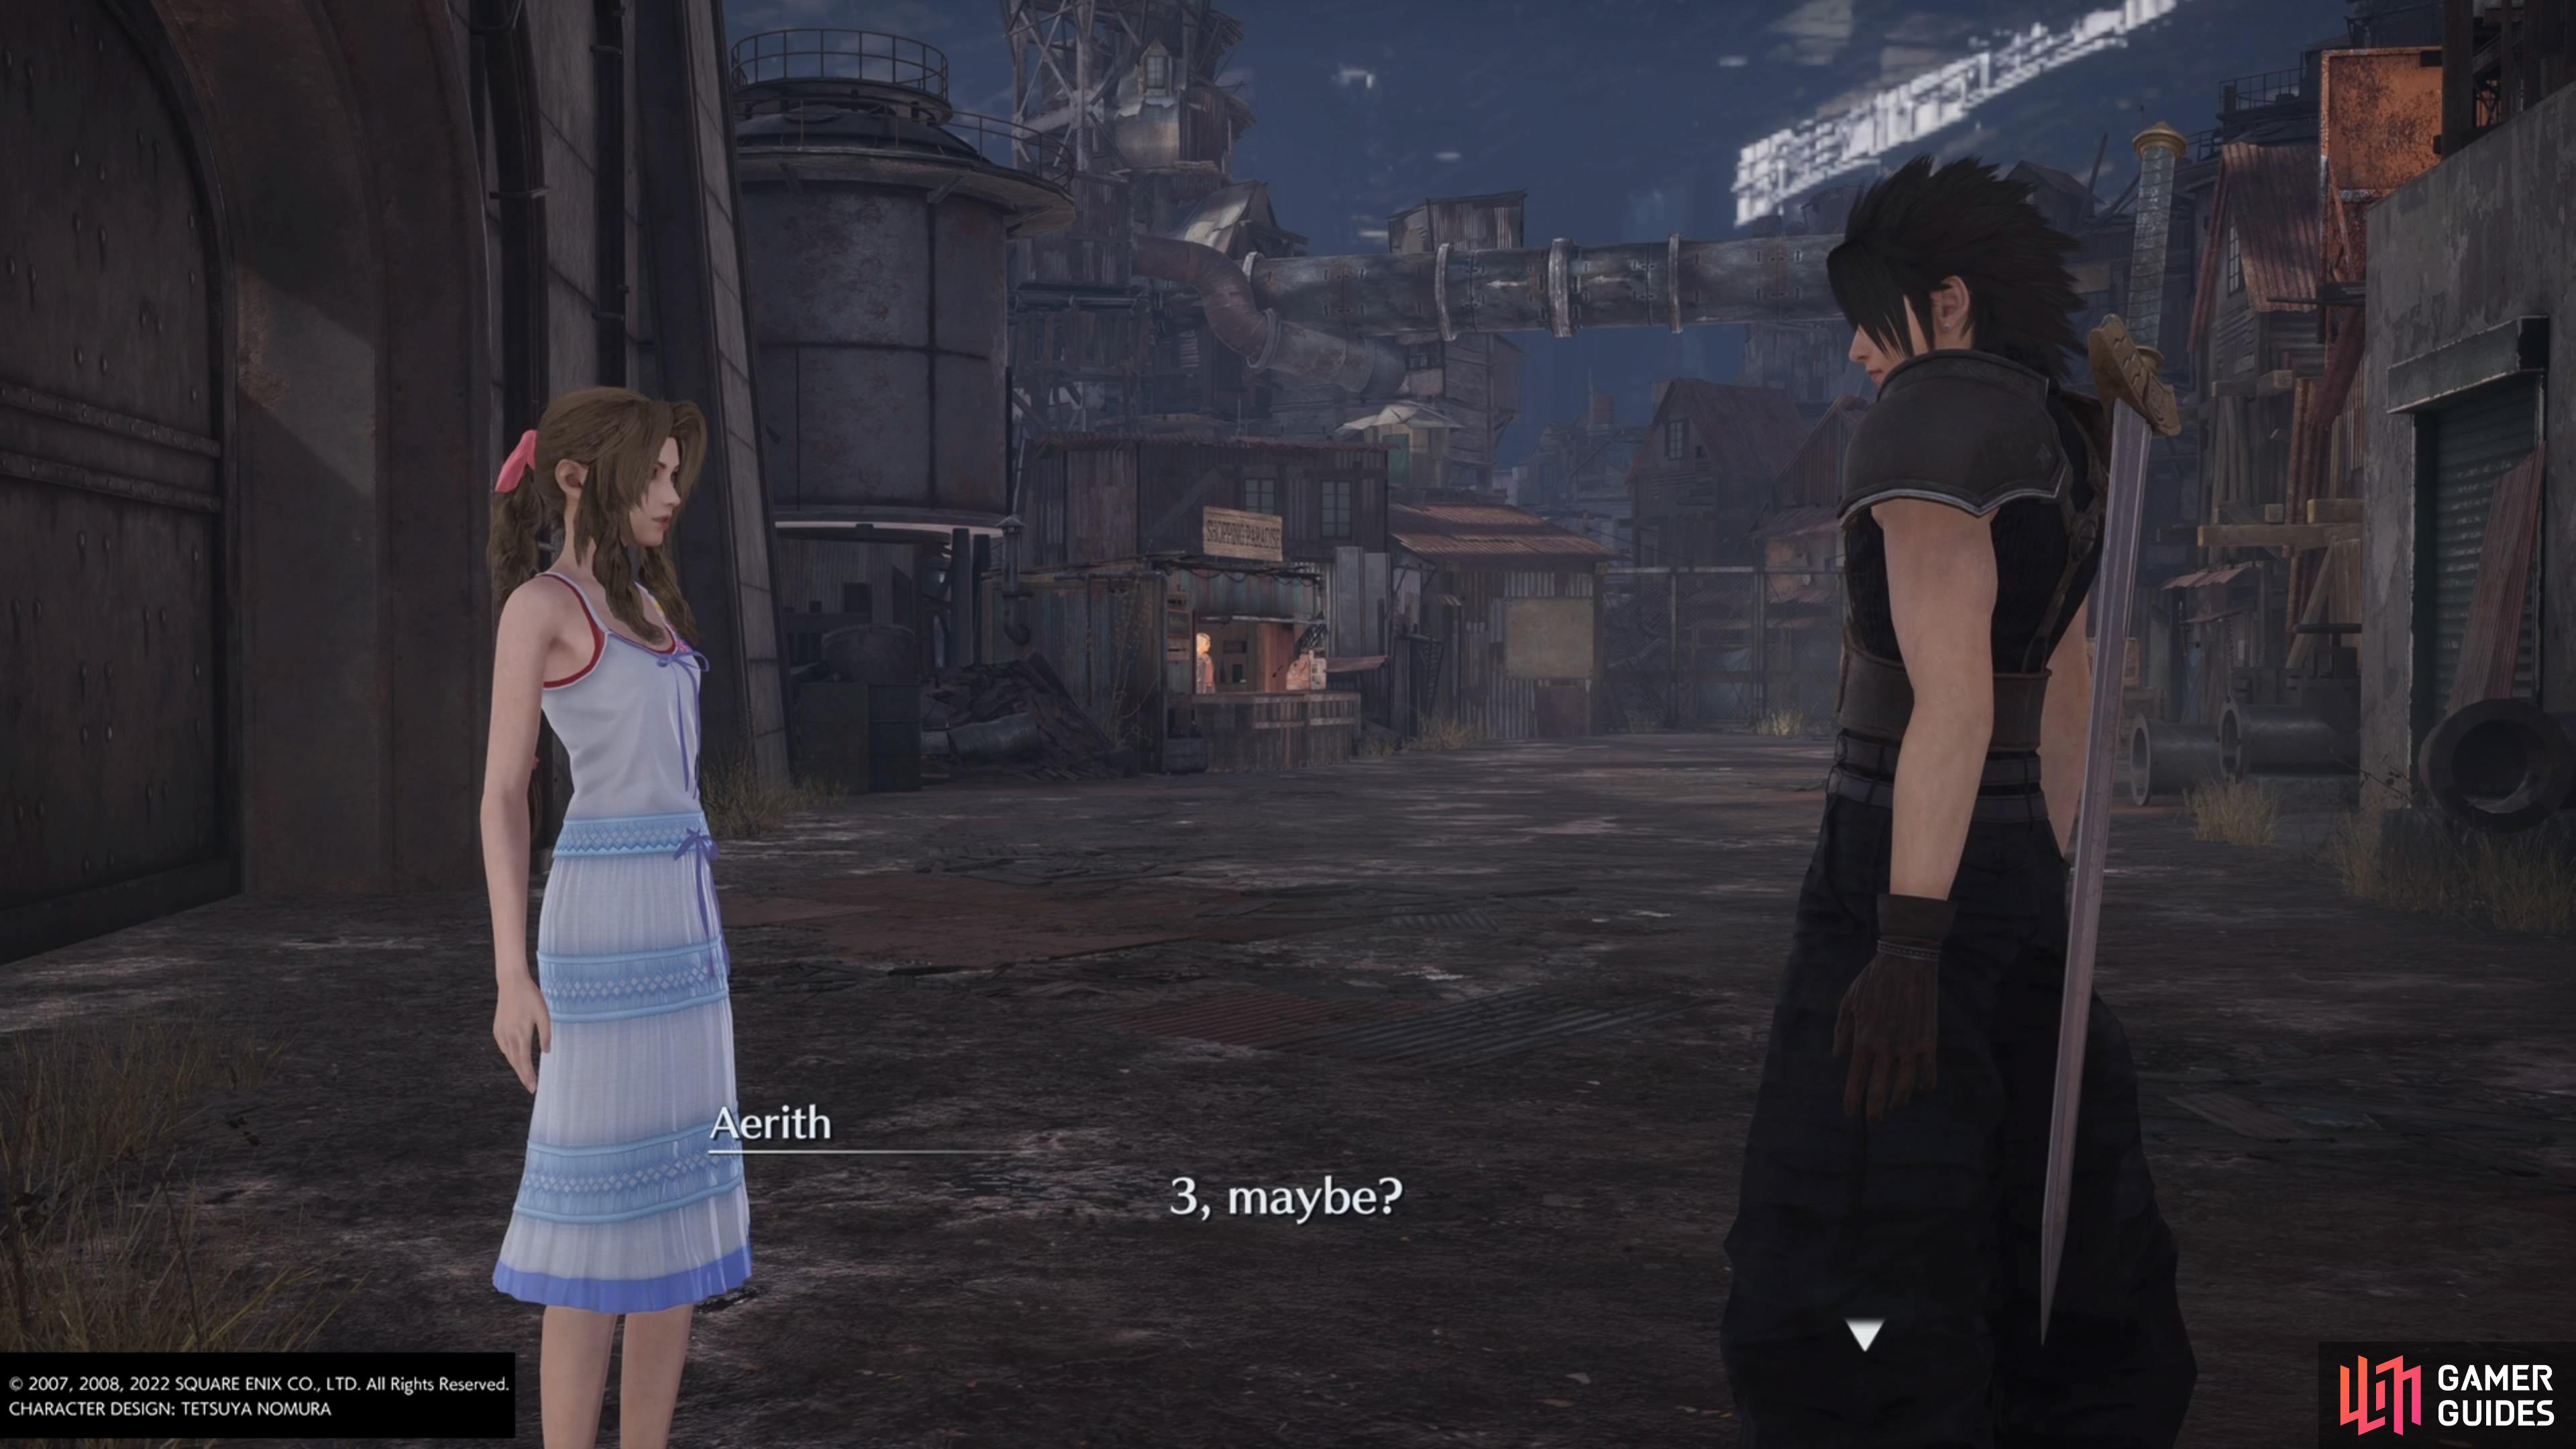 Aerith can tell you what she thinks will win